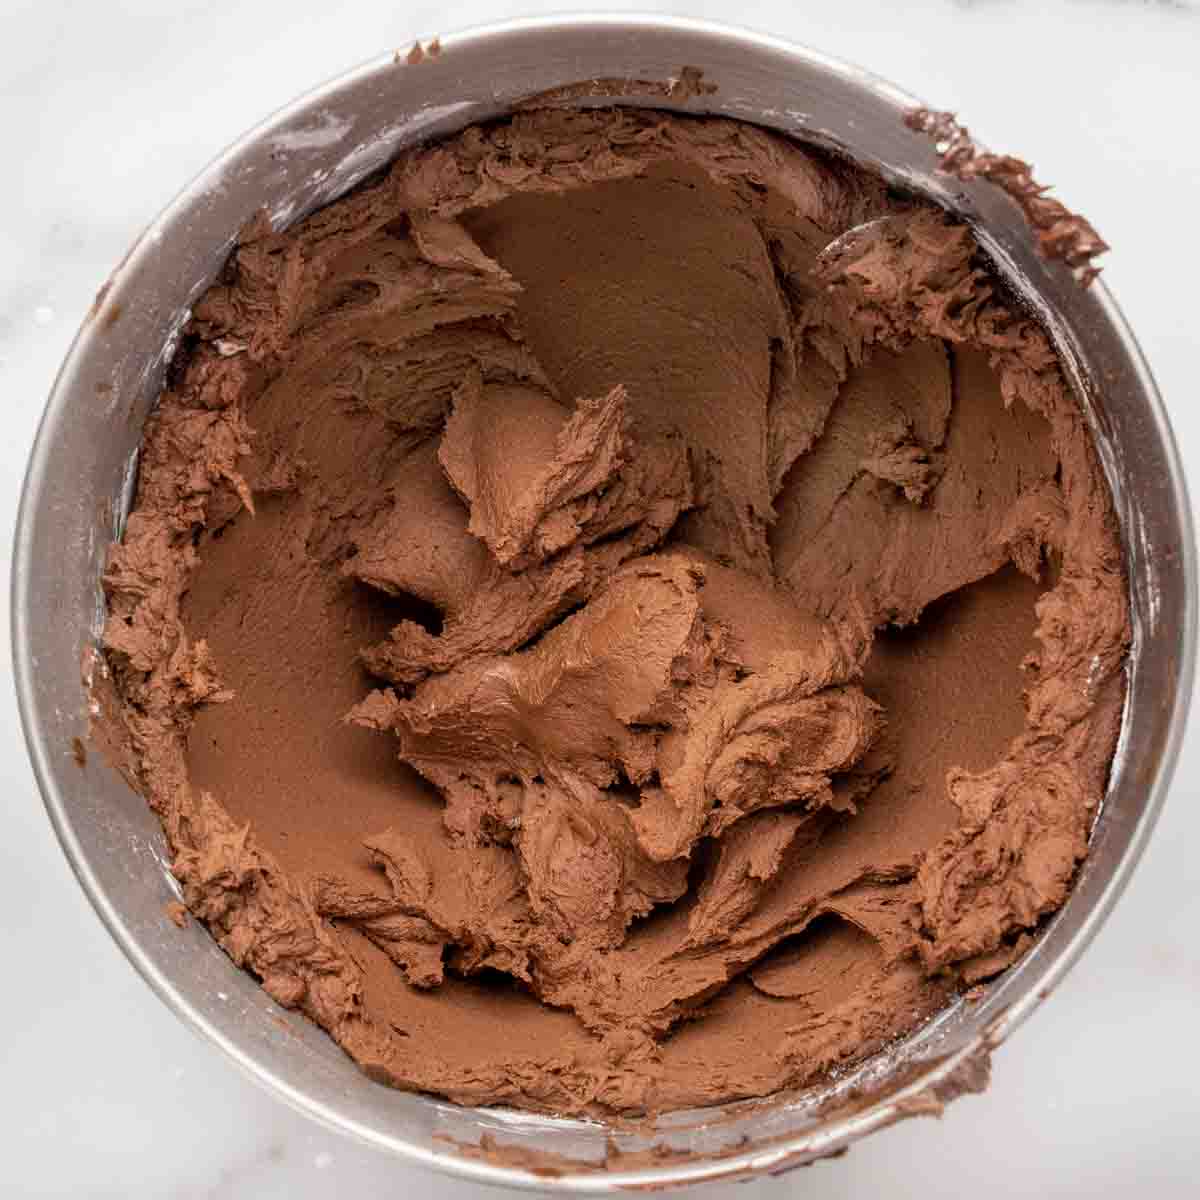 finished chocolate buttercream frosting